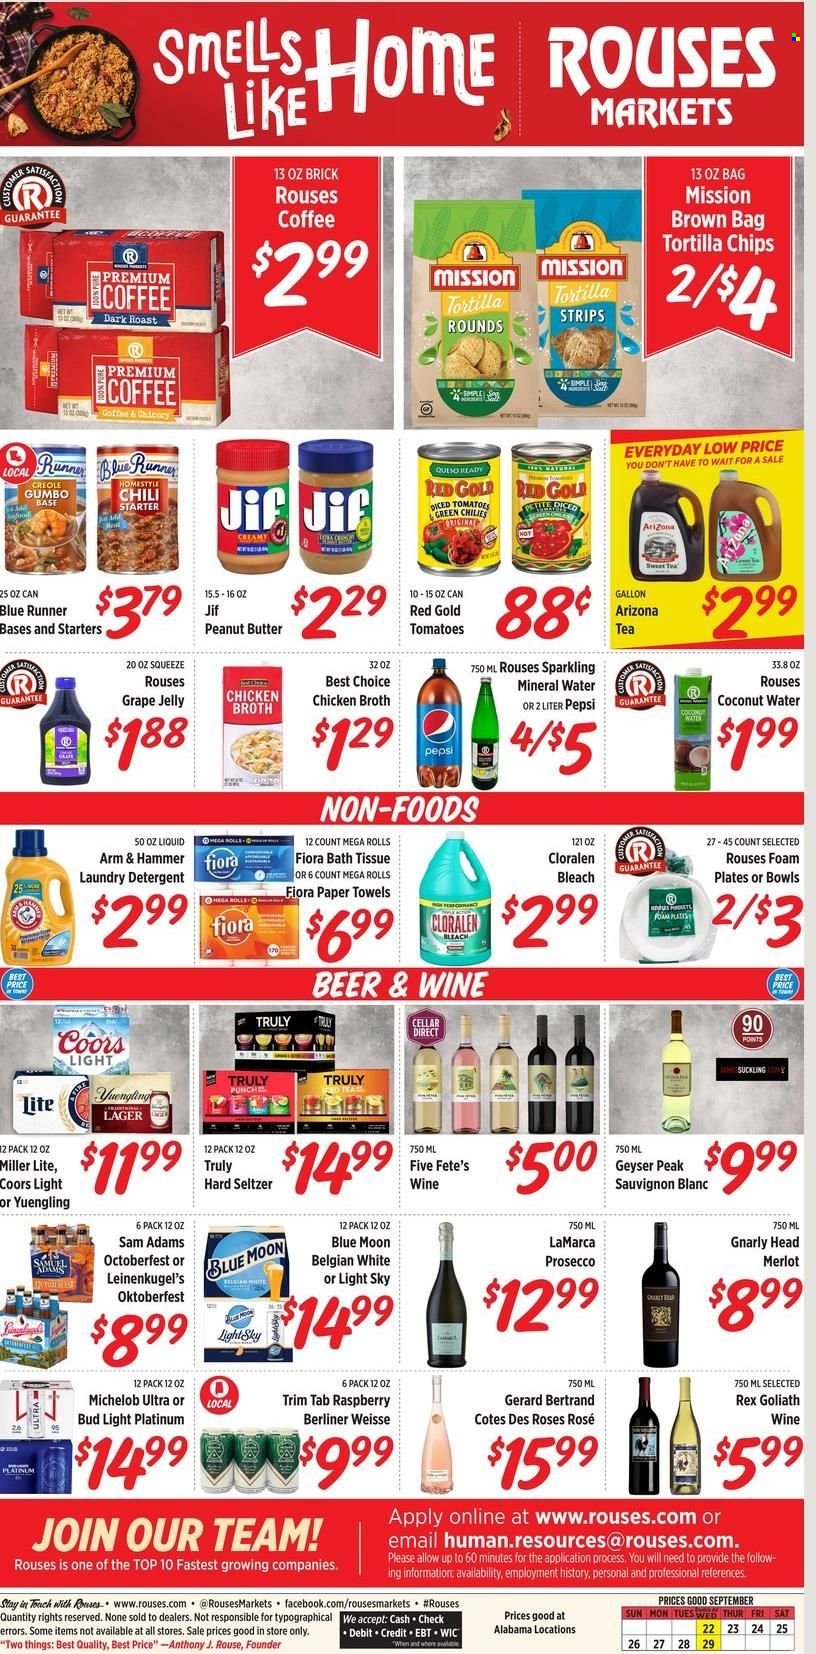 Rouses Markets ad  - 09.22.2021 - 09.29.2021.